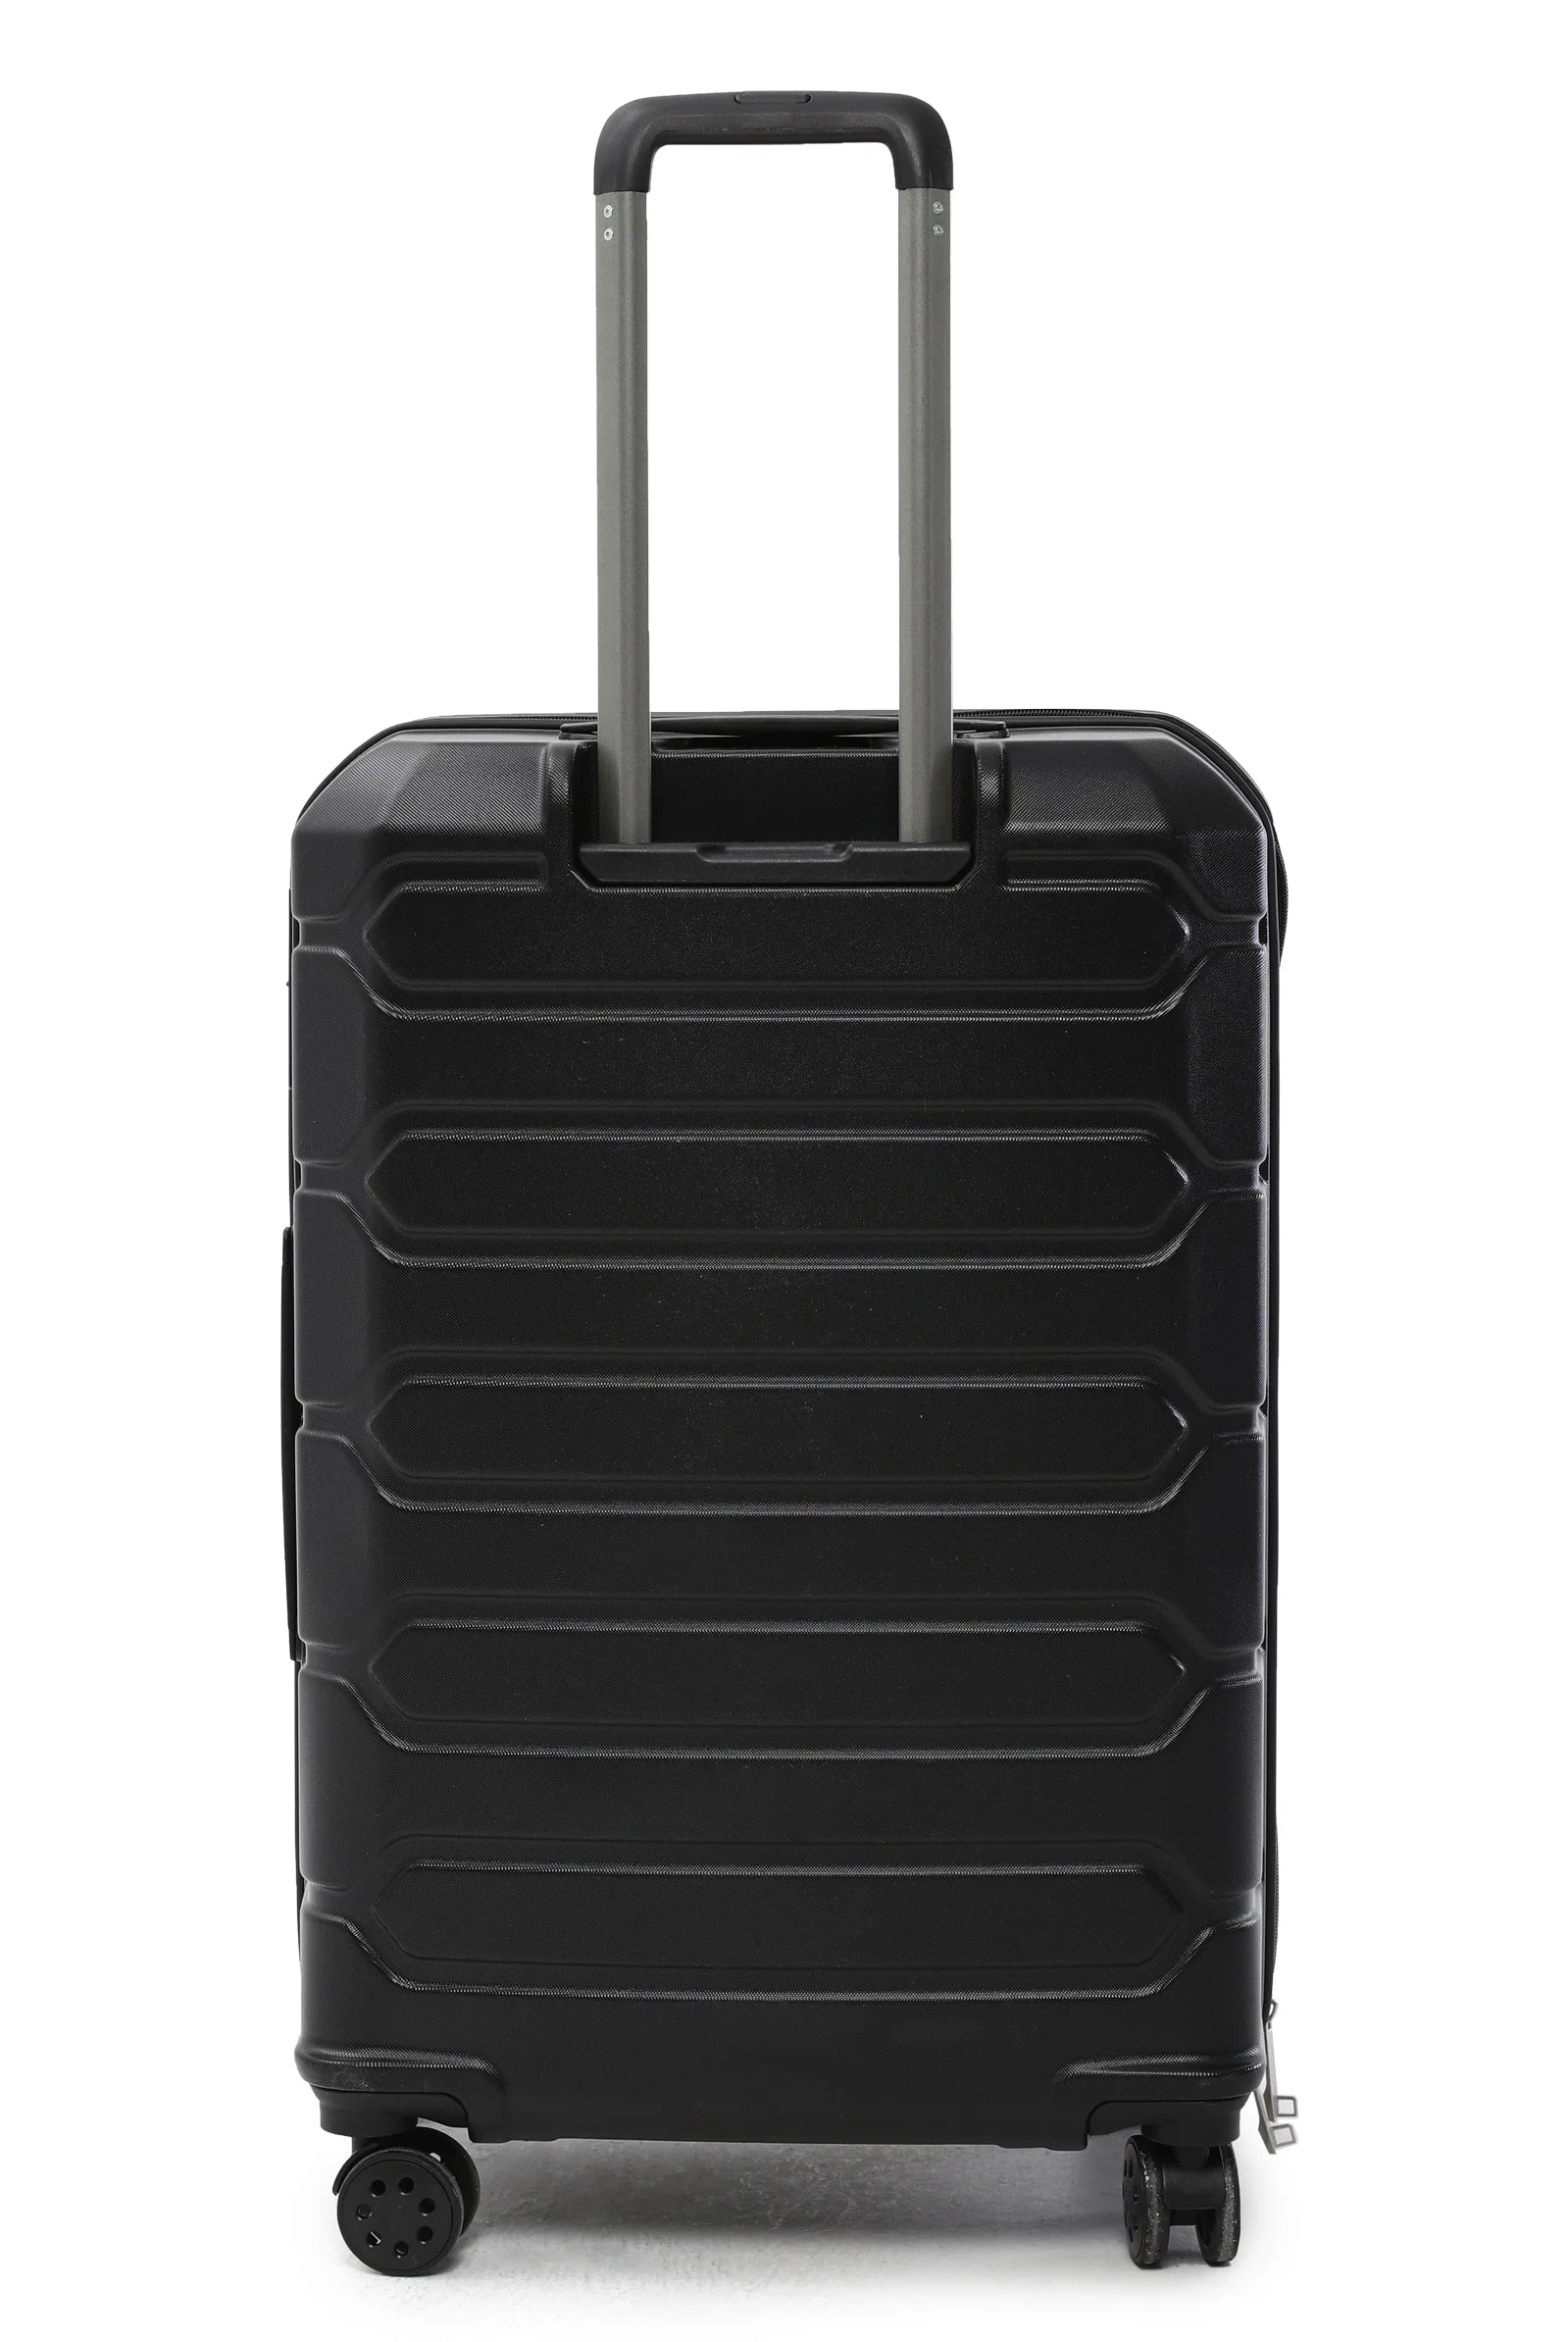 black carry on luggage